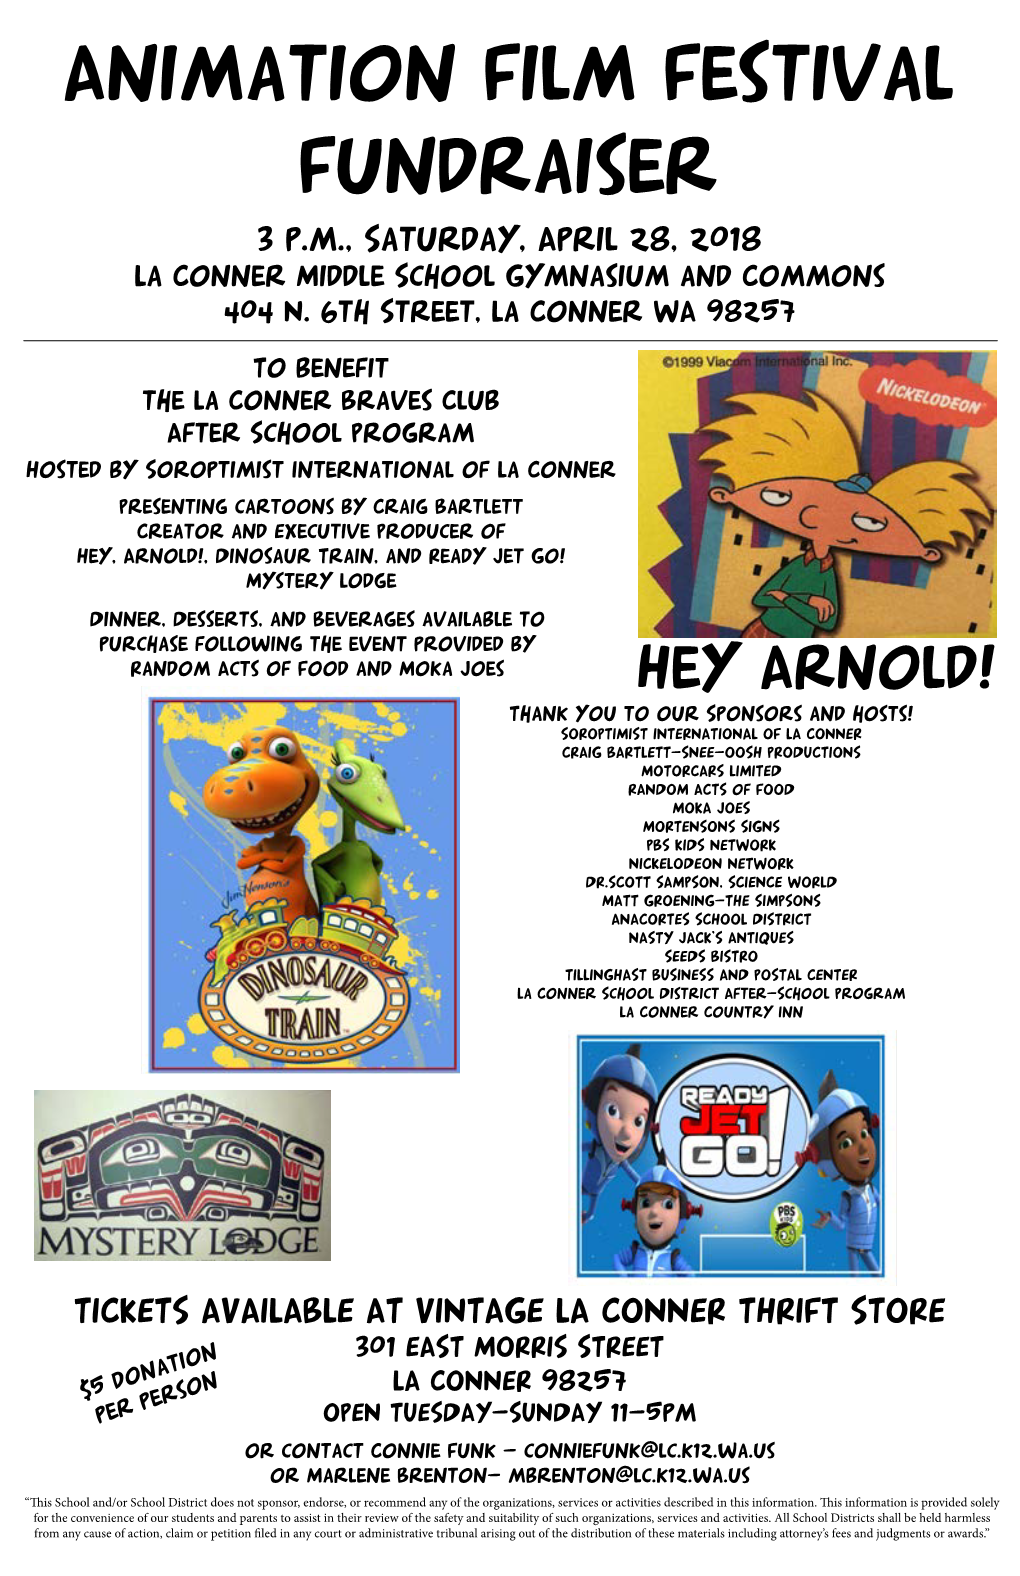 Animation Film Festival Fundraiser 3 P.M., Saturday, April 28, 2018 La Conner Middle School Gymnasium and Commons 404 N